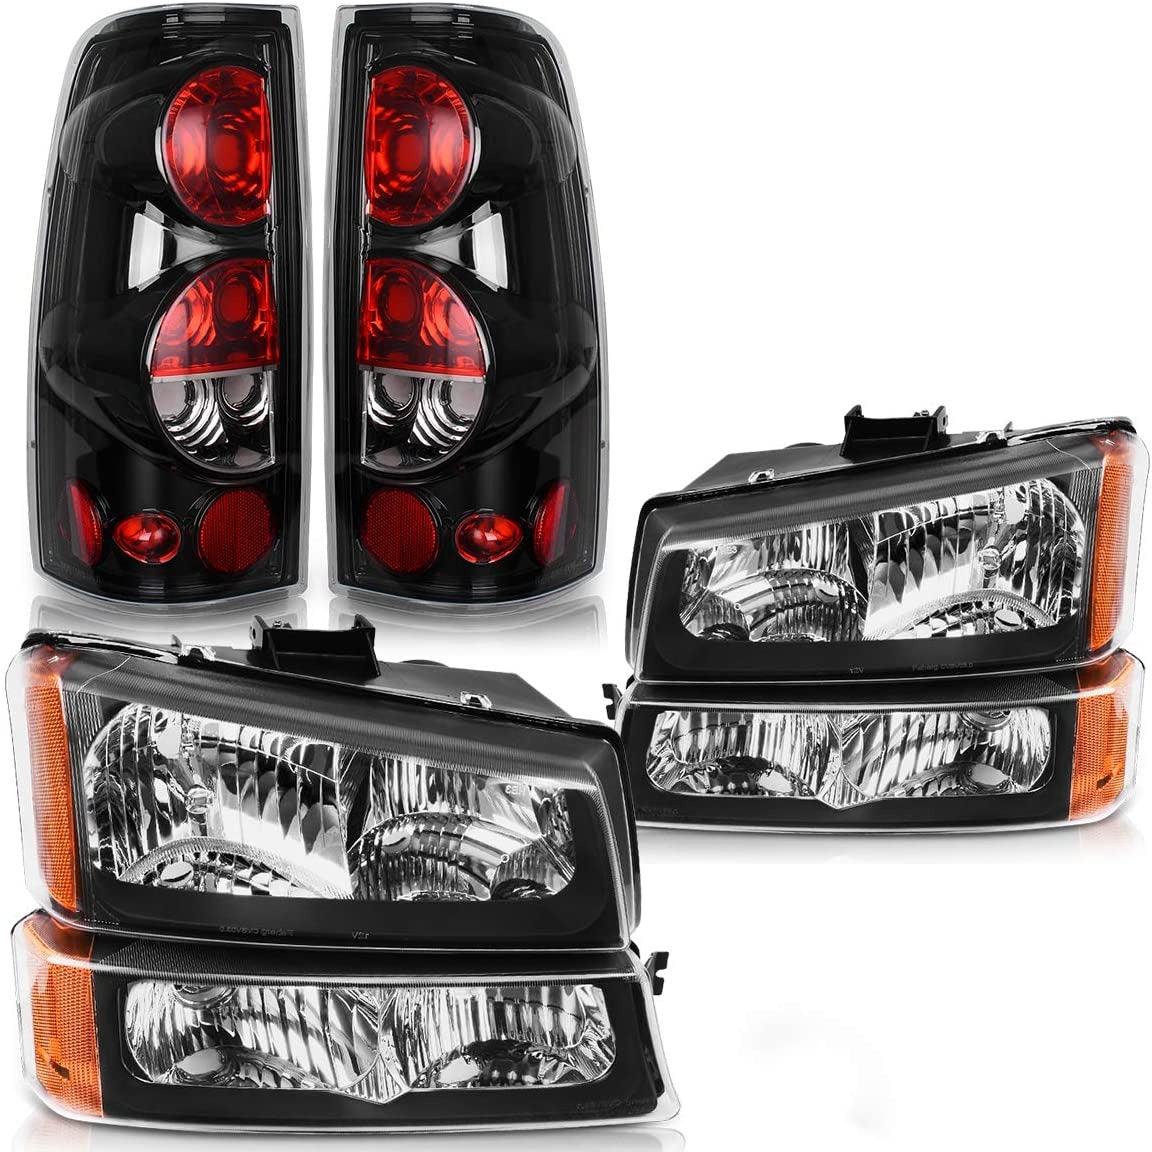 BLACK Headlights+Bumper Lamps+Tail Light Set for 2003-2006 Chevy